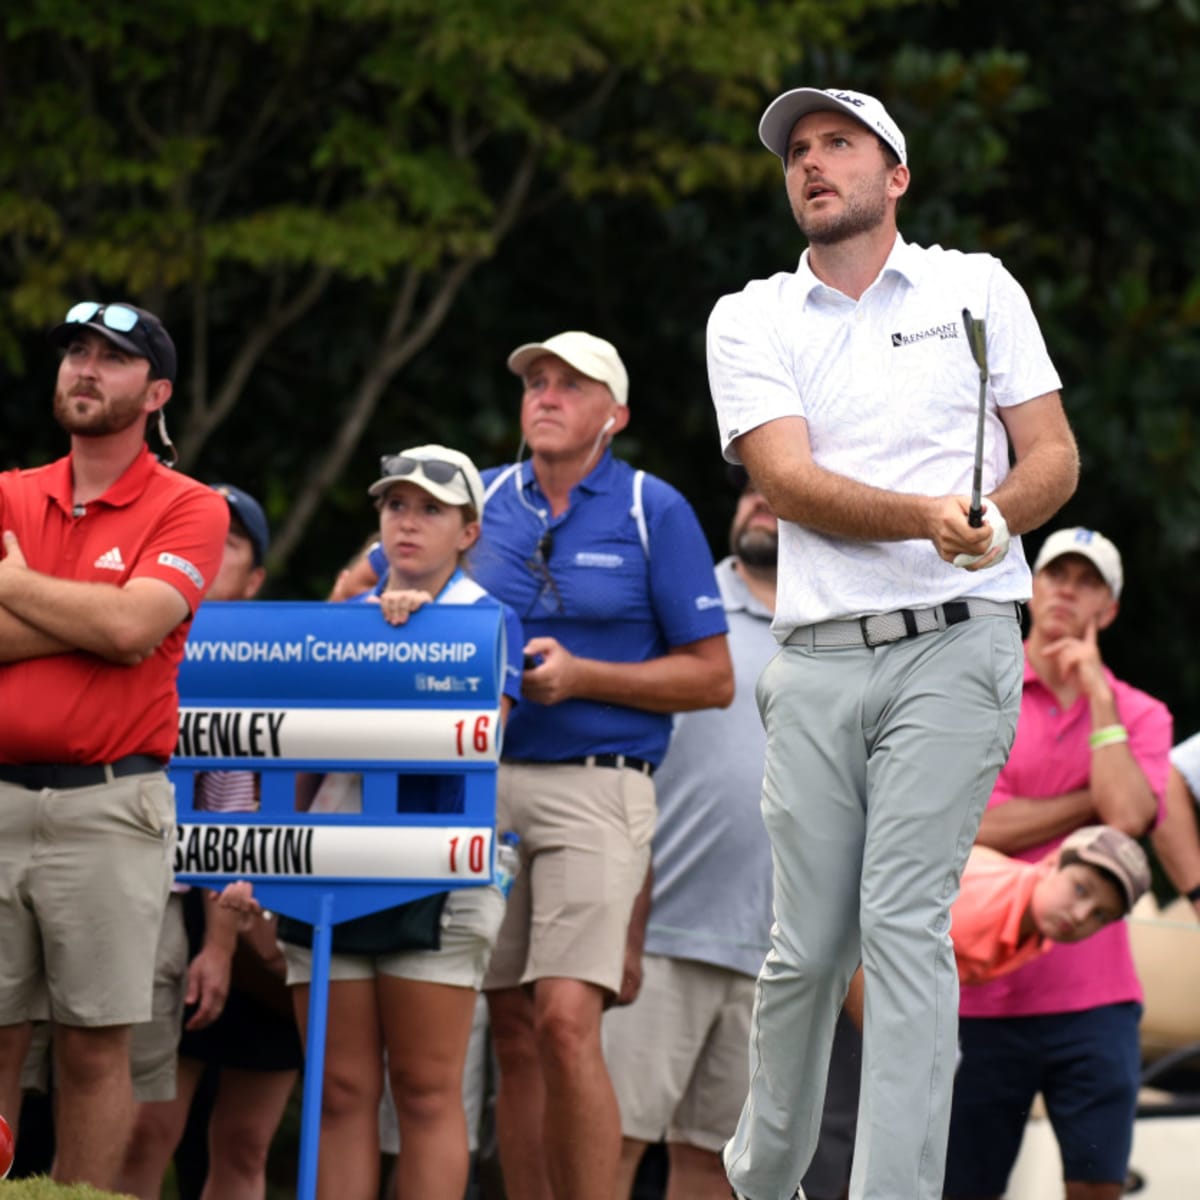 Wyndham Championship, Final Round Live Stream Watch Online, TV Channel, Start Time - How to Watch and Stream Major League and College Sports